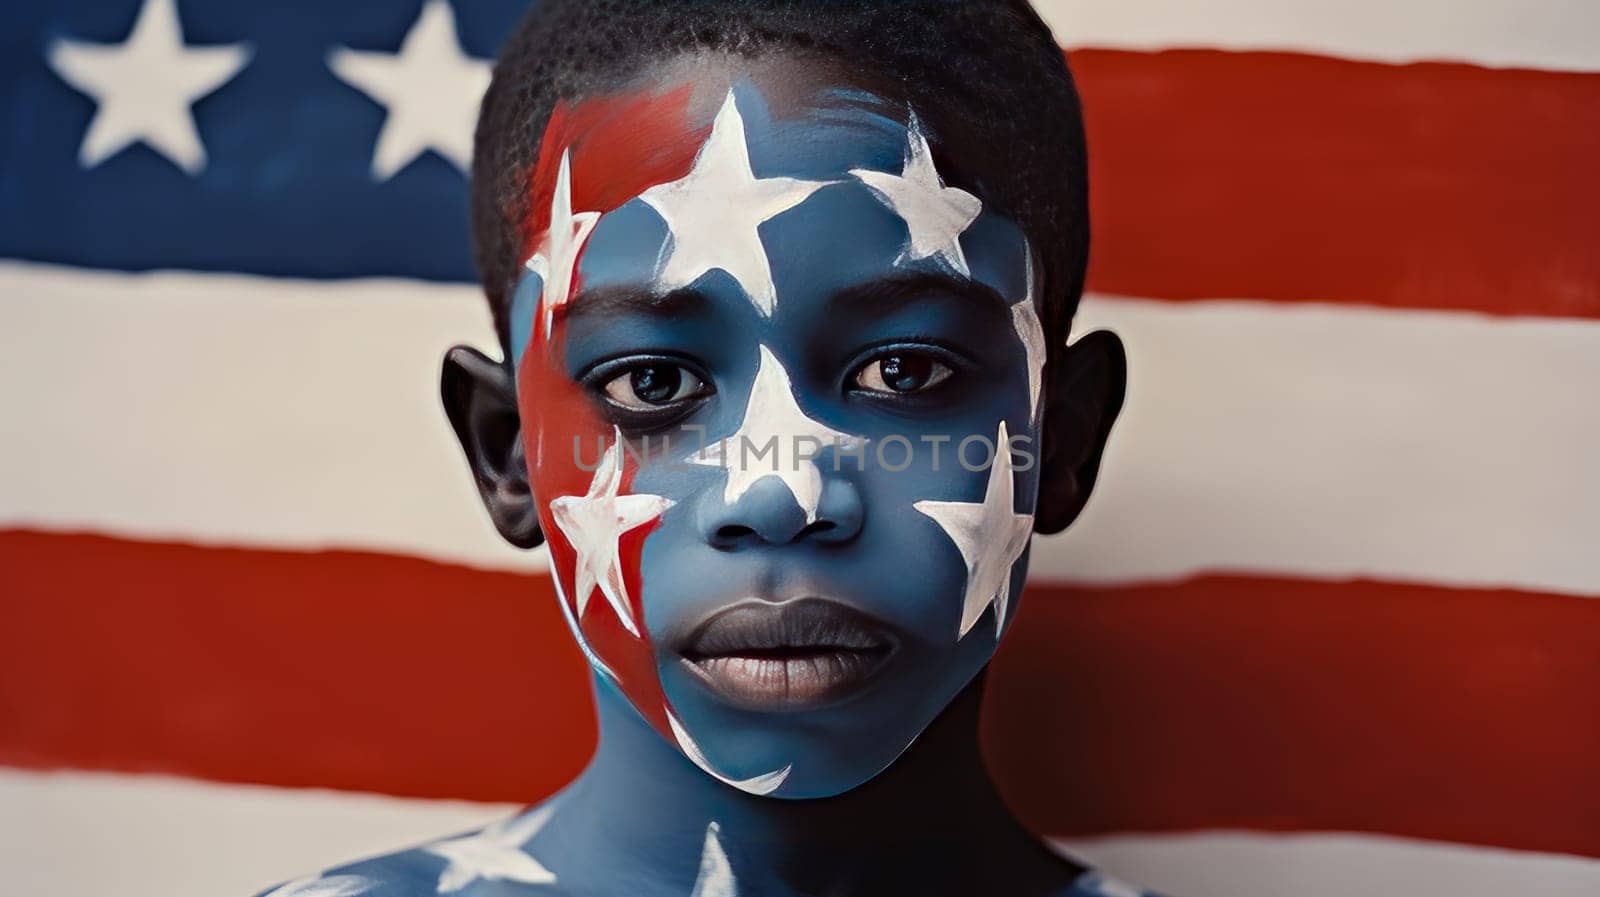 Afro is a dark-skinned, serious, responsible boy with his face painted in the color of the flag of the United States of America. by Alla_Yurtayeva